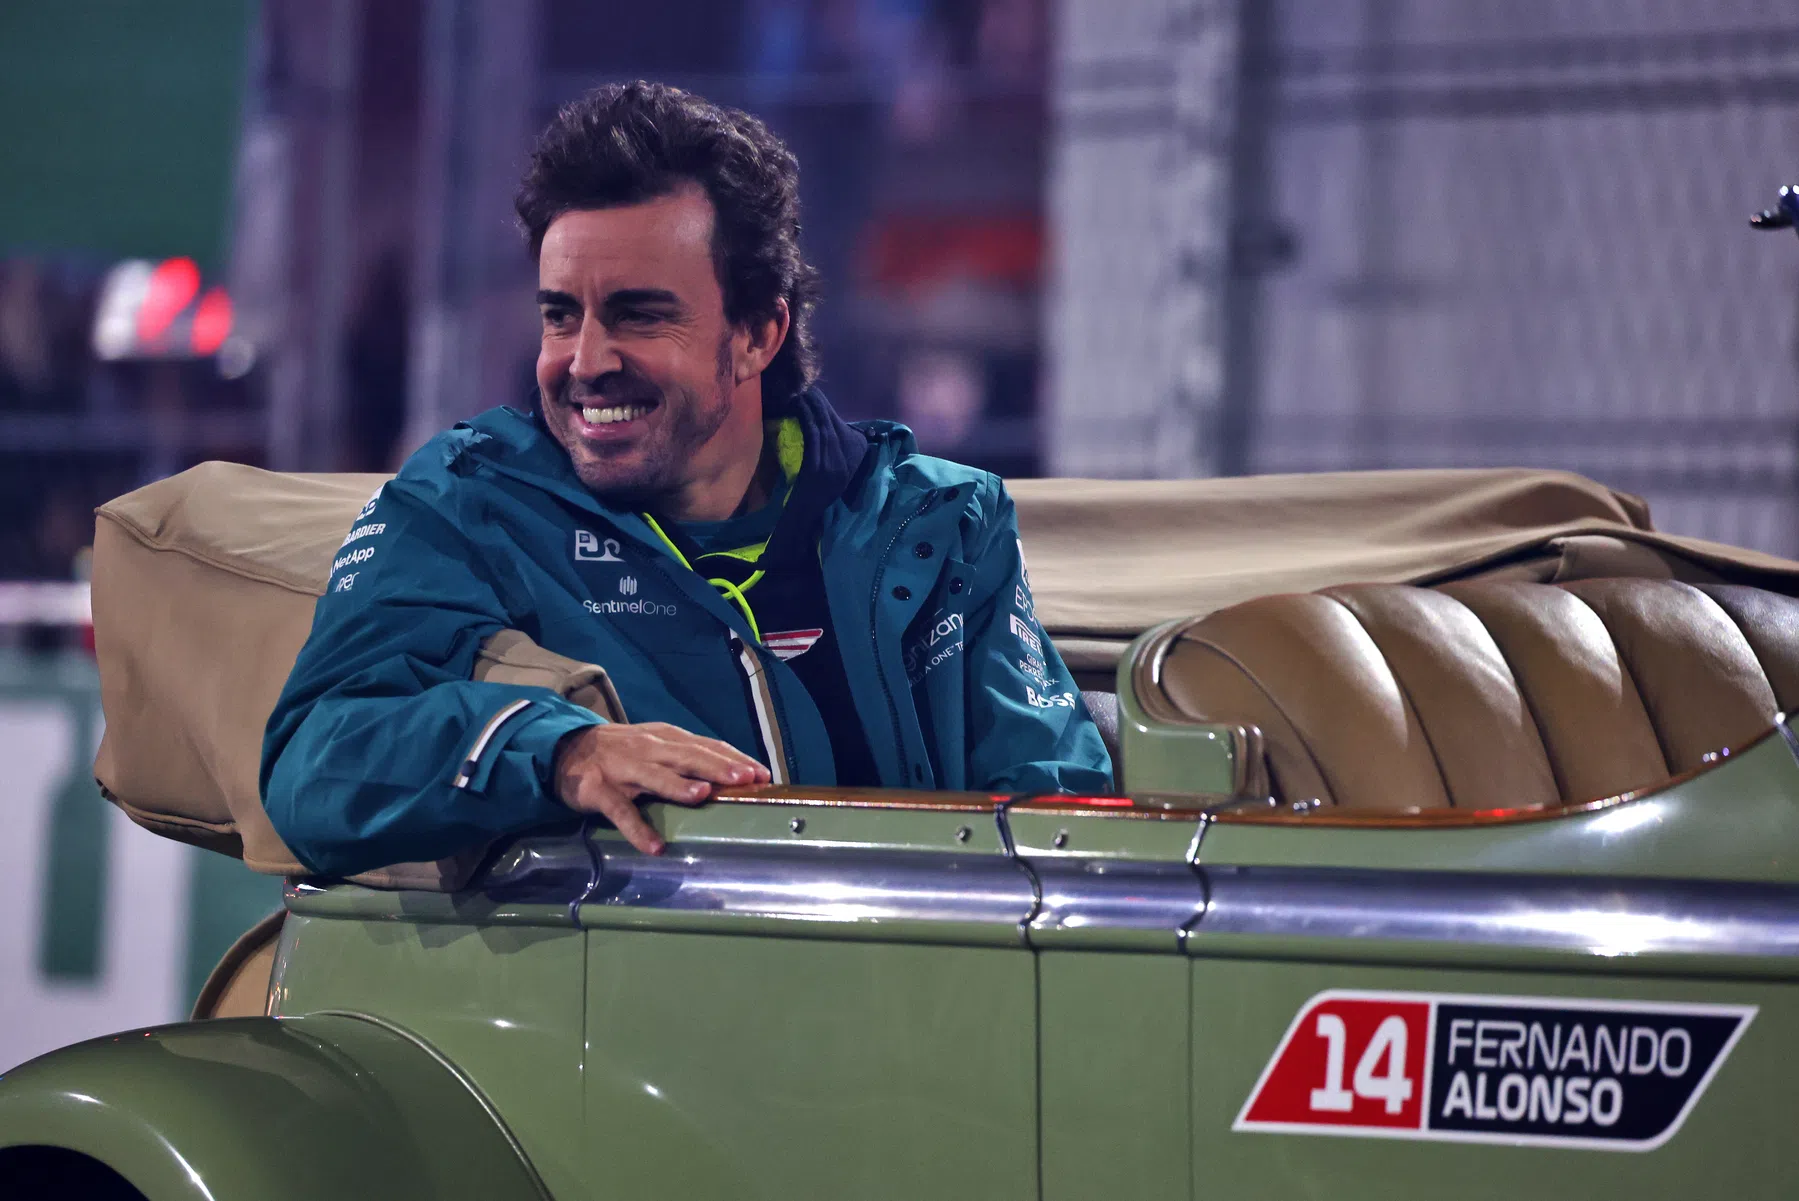 fernando alonso on young talent in formula one